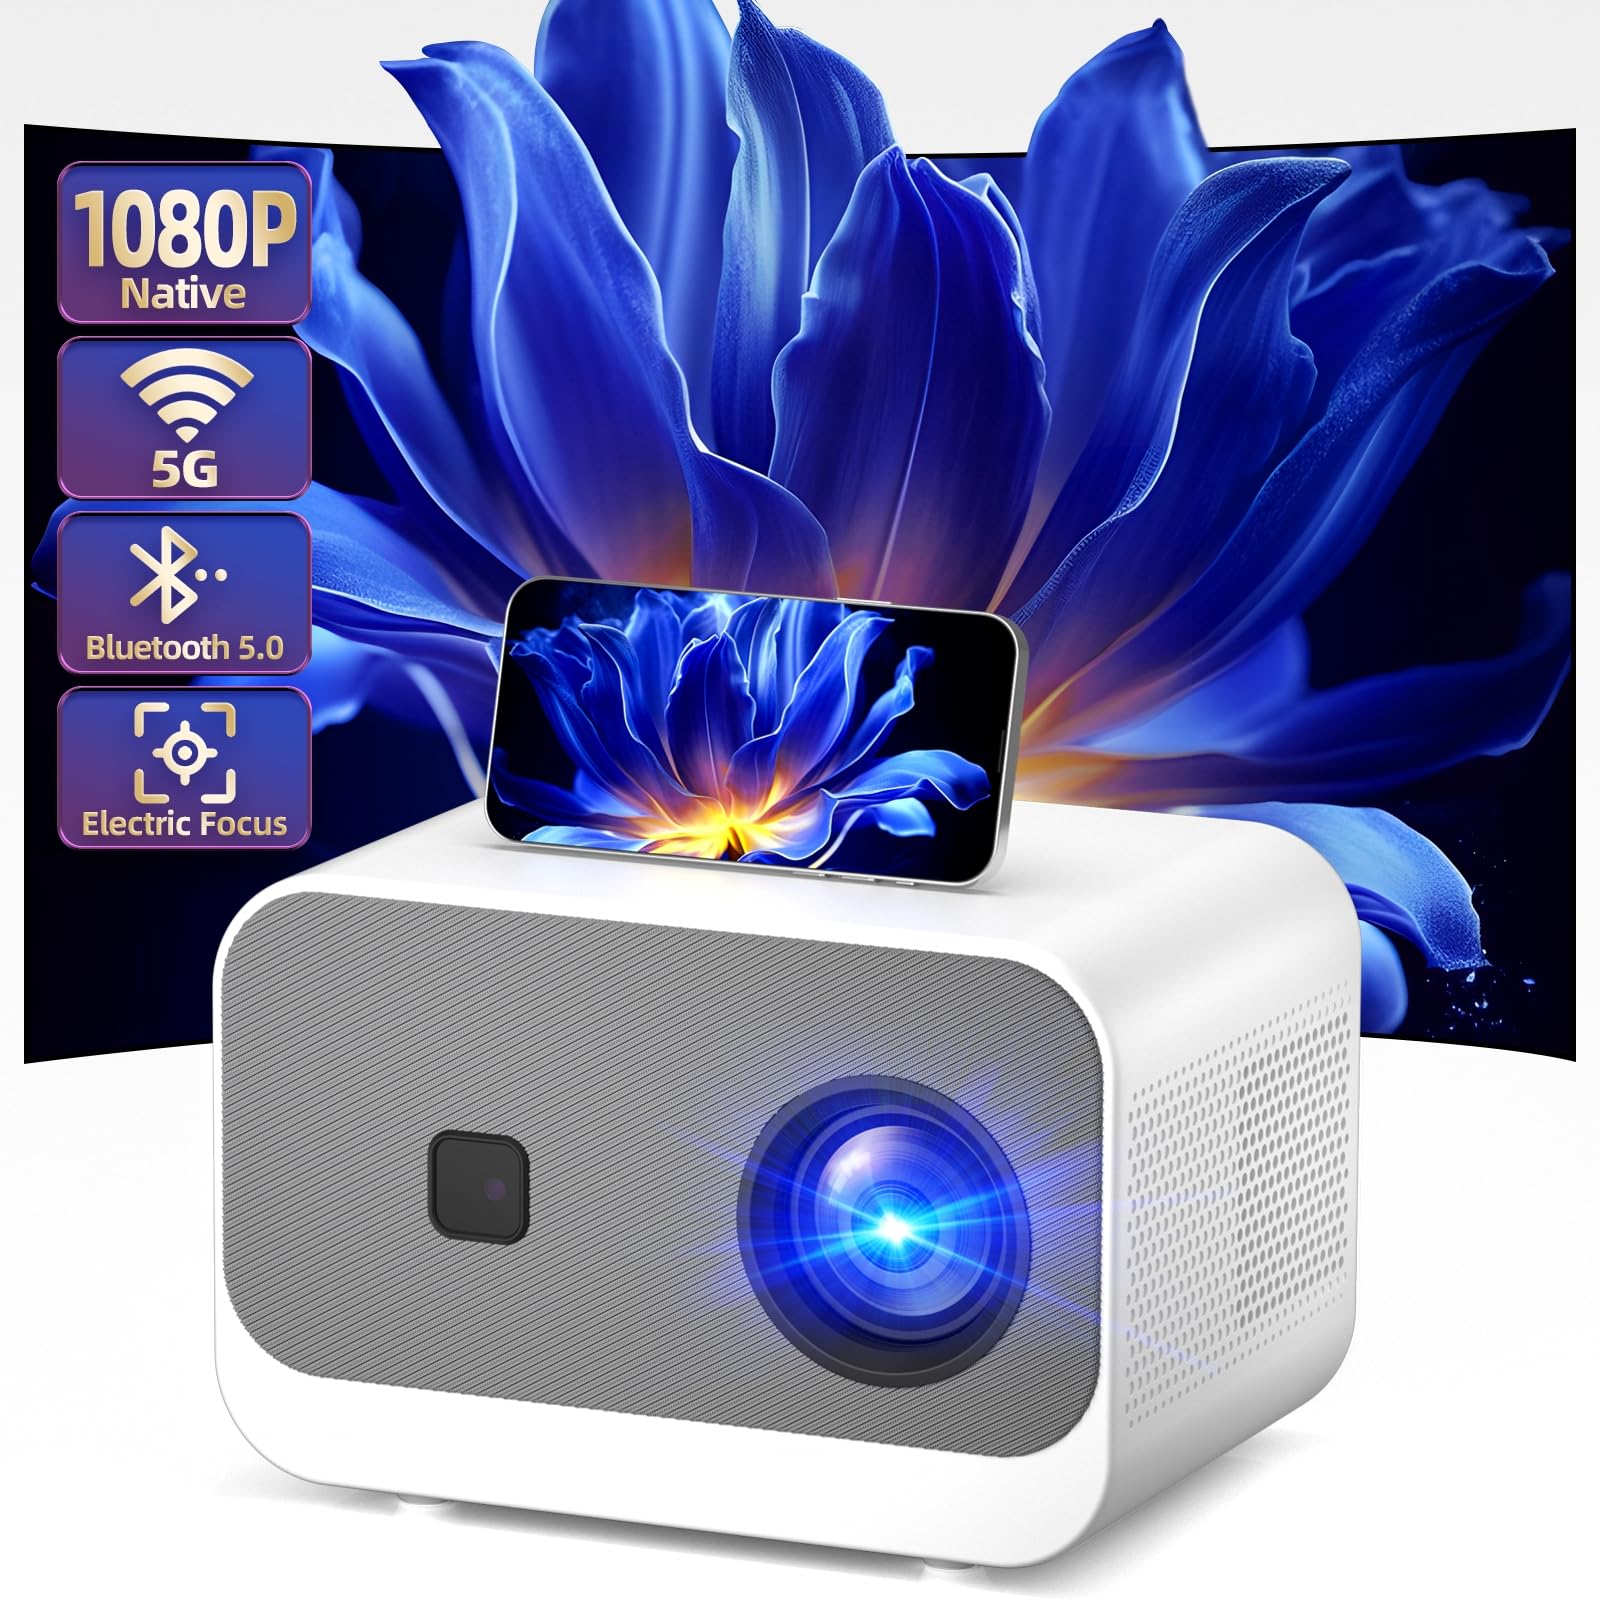 [Electric Focus] 18K Native 1080P Mini Bluetooth Projector 4K Support, 5G WiFi FULL HD 1080P Portable Video Projector Max 300” Display |ZOOM 50%|, Outdoor Movie Projector for HDMI/USB/AV/TV Stick/PS4